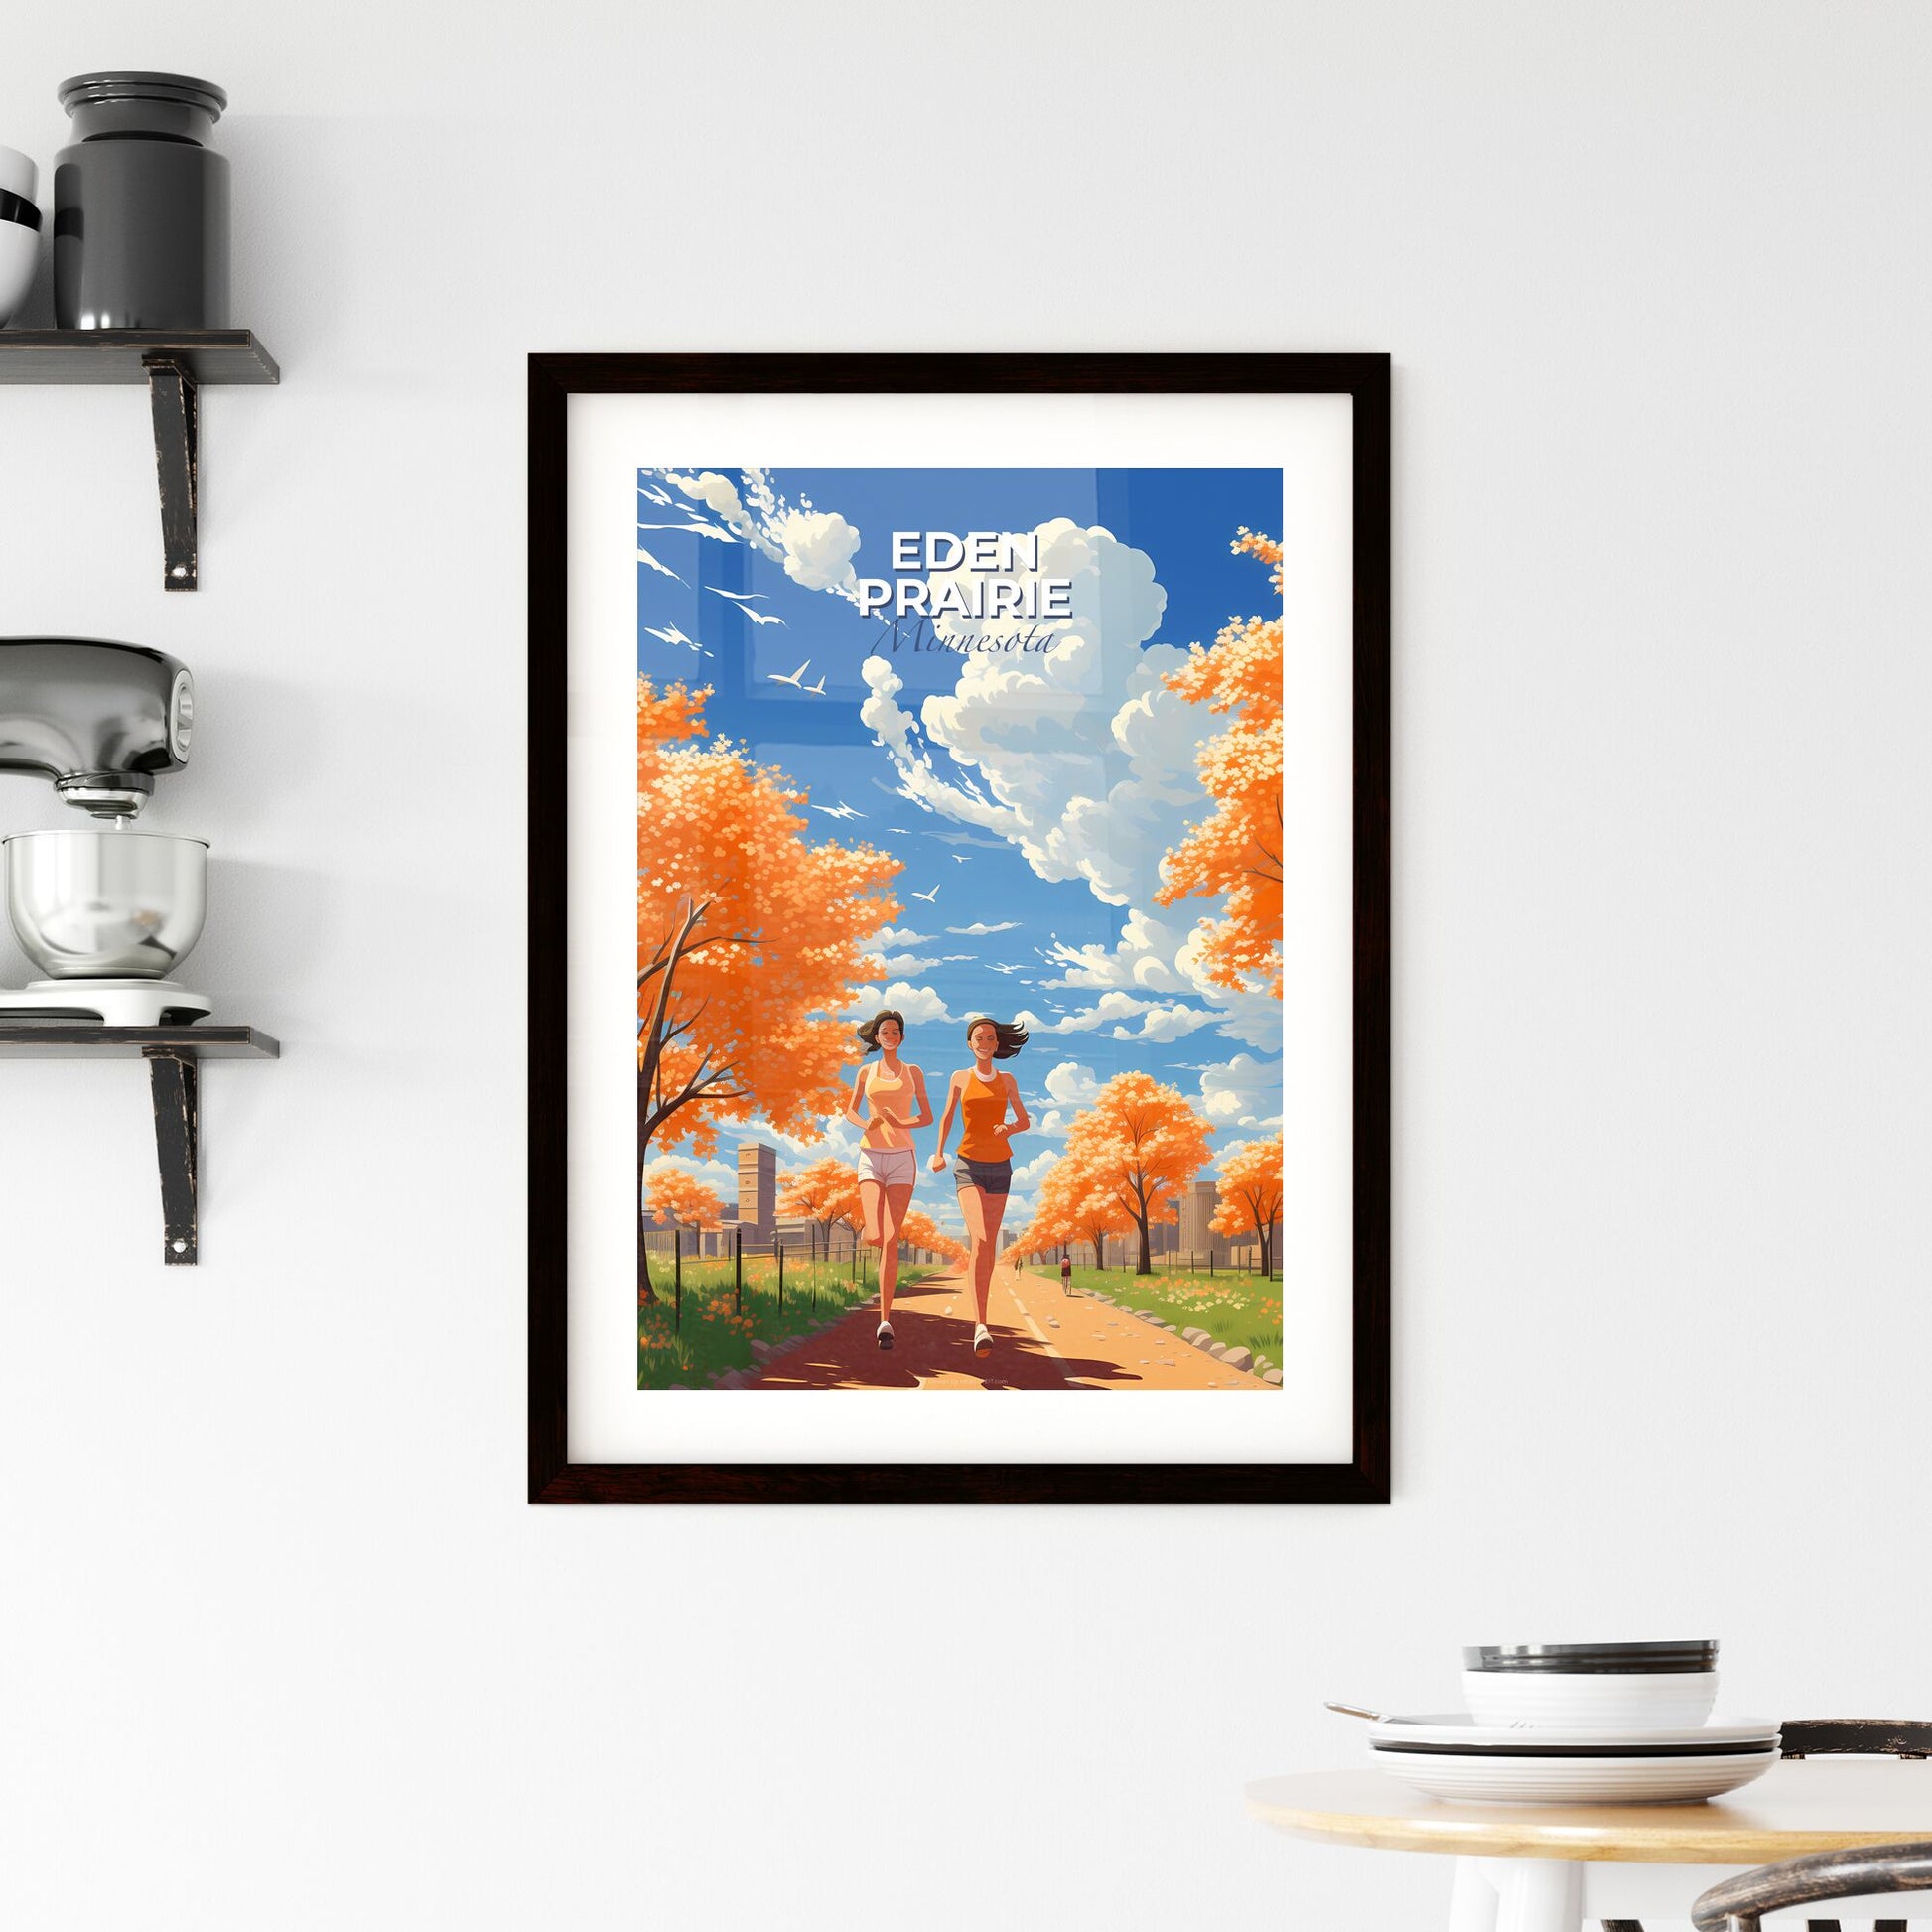 Eden Prairie, Minnesota, A Poster of two women running on a road with orange trees and buildings Default Title